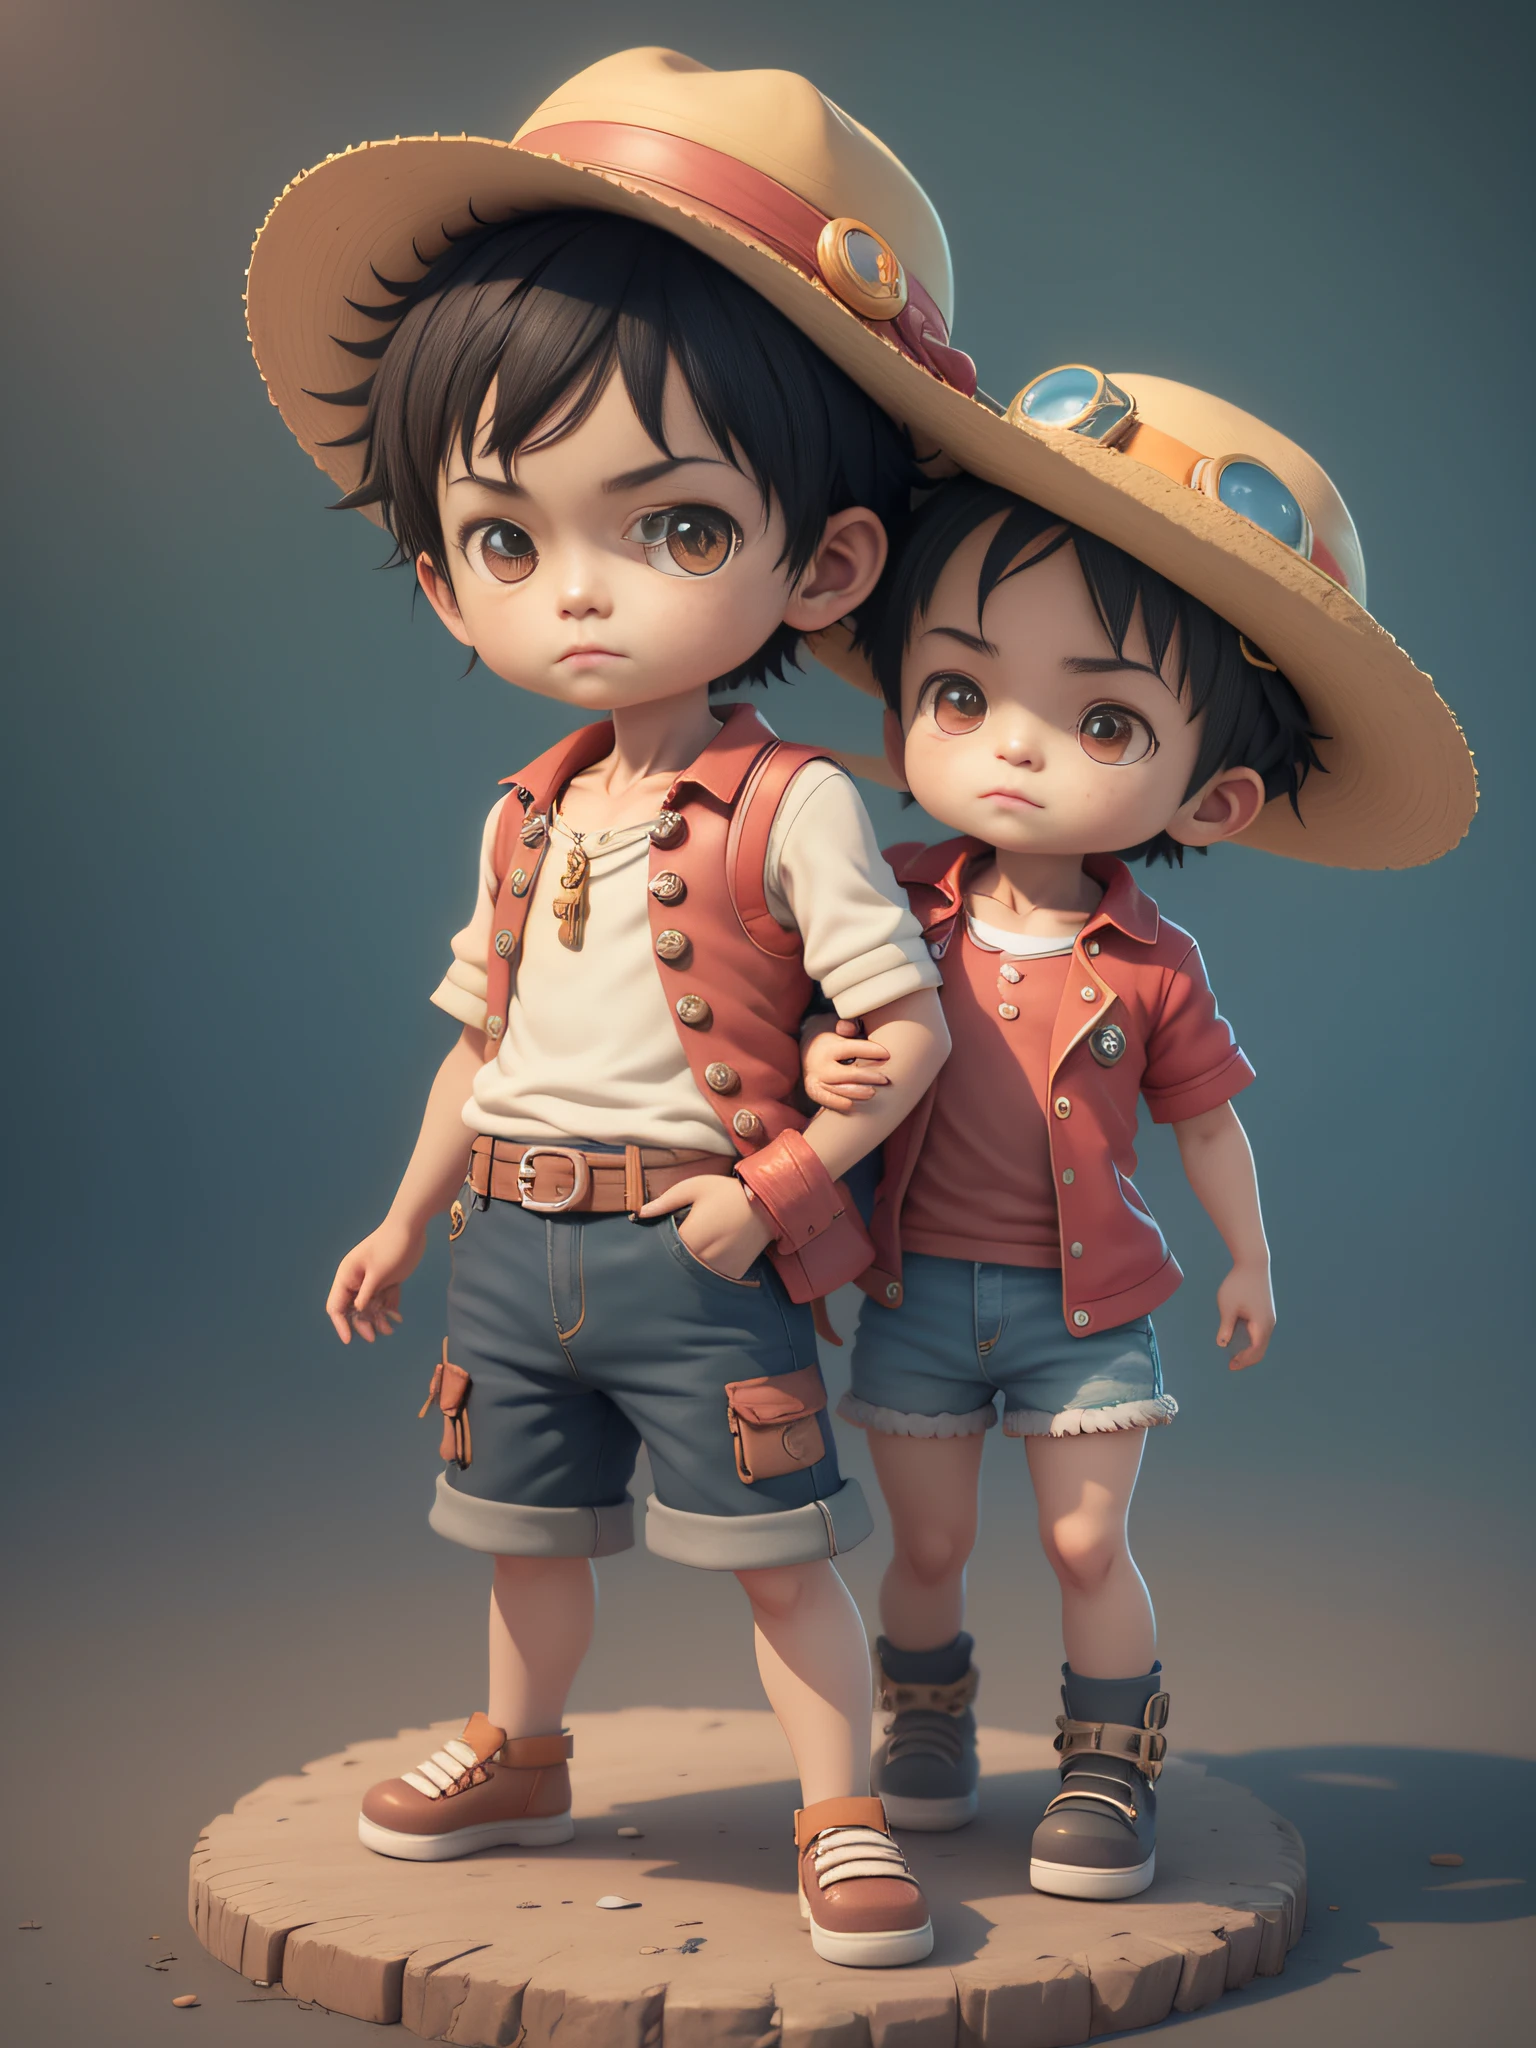 cute 3d render, cute detailed digital art, male explorer mini cute boy, cute digital painting, stylized 3d render, cute digital art, cute render 3d anime boy, Luffy the little pirate, wearing straw hat, cute! c4d, portrait anime sea pirate boy, He wears blue shorts with cuffs, sandals, and an open sleeveless red vest, standing in a pirate ship.